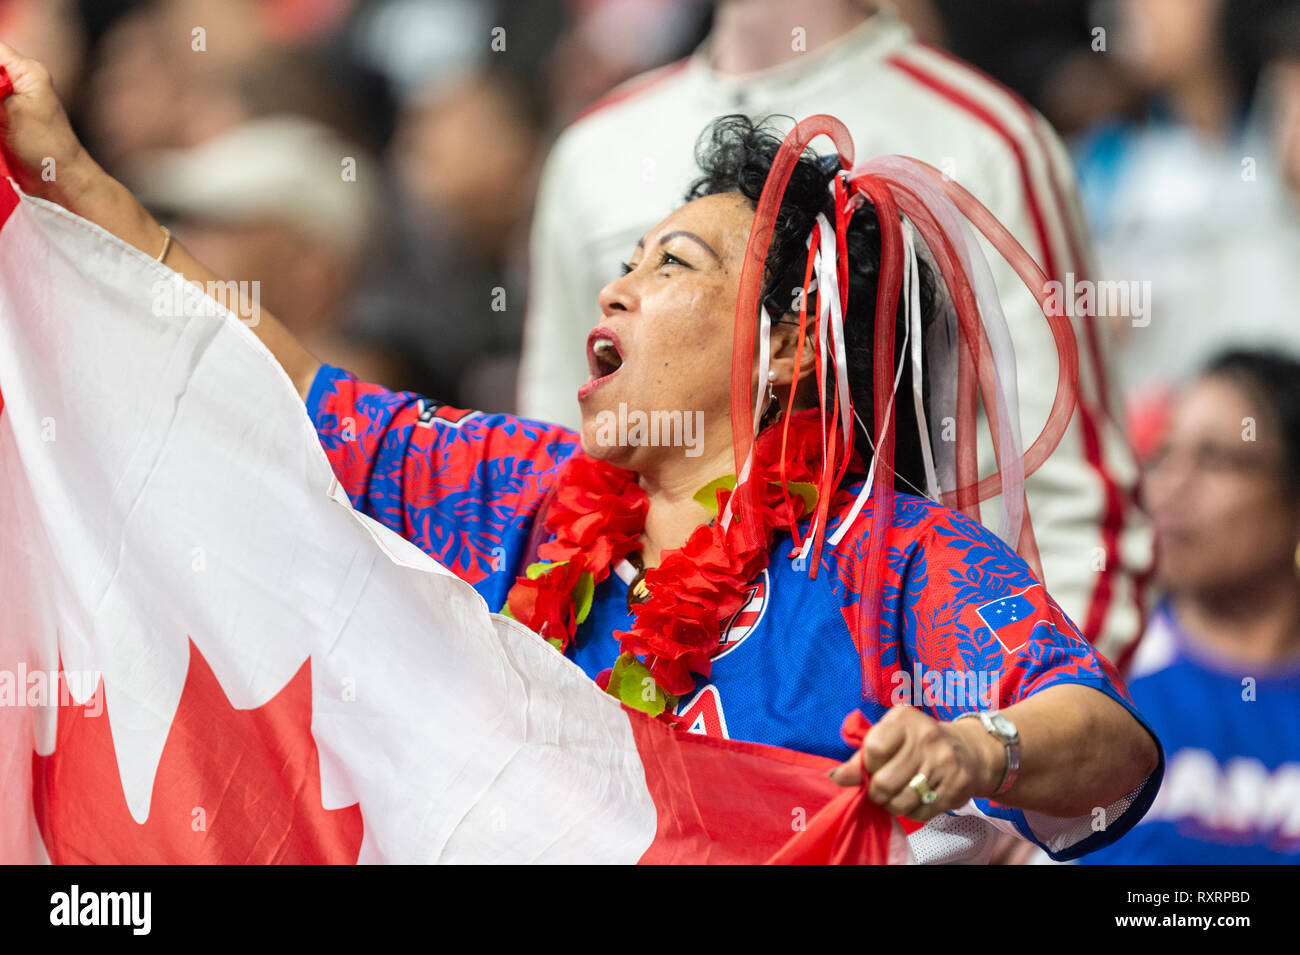 Vancouver, Canada. 10 March, 2019.  One of many fans in attendance dressed in costume. 2019 HSBC Canada Sevens Rugby - Day Two, BC Place Stadium. © Gerry Rousseau/Alamy Live News Stock Photo